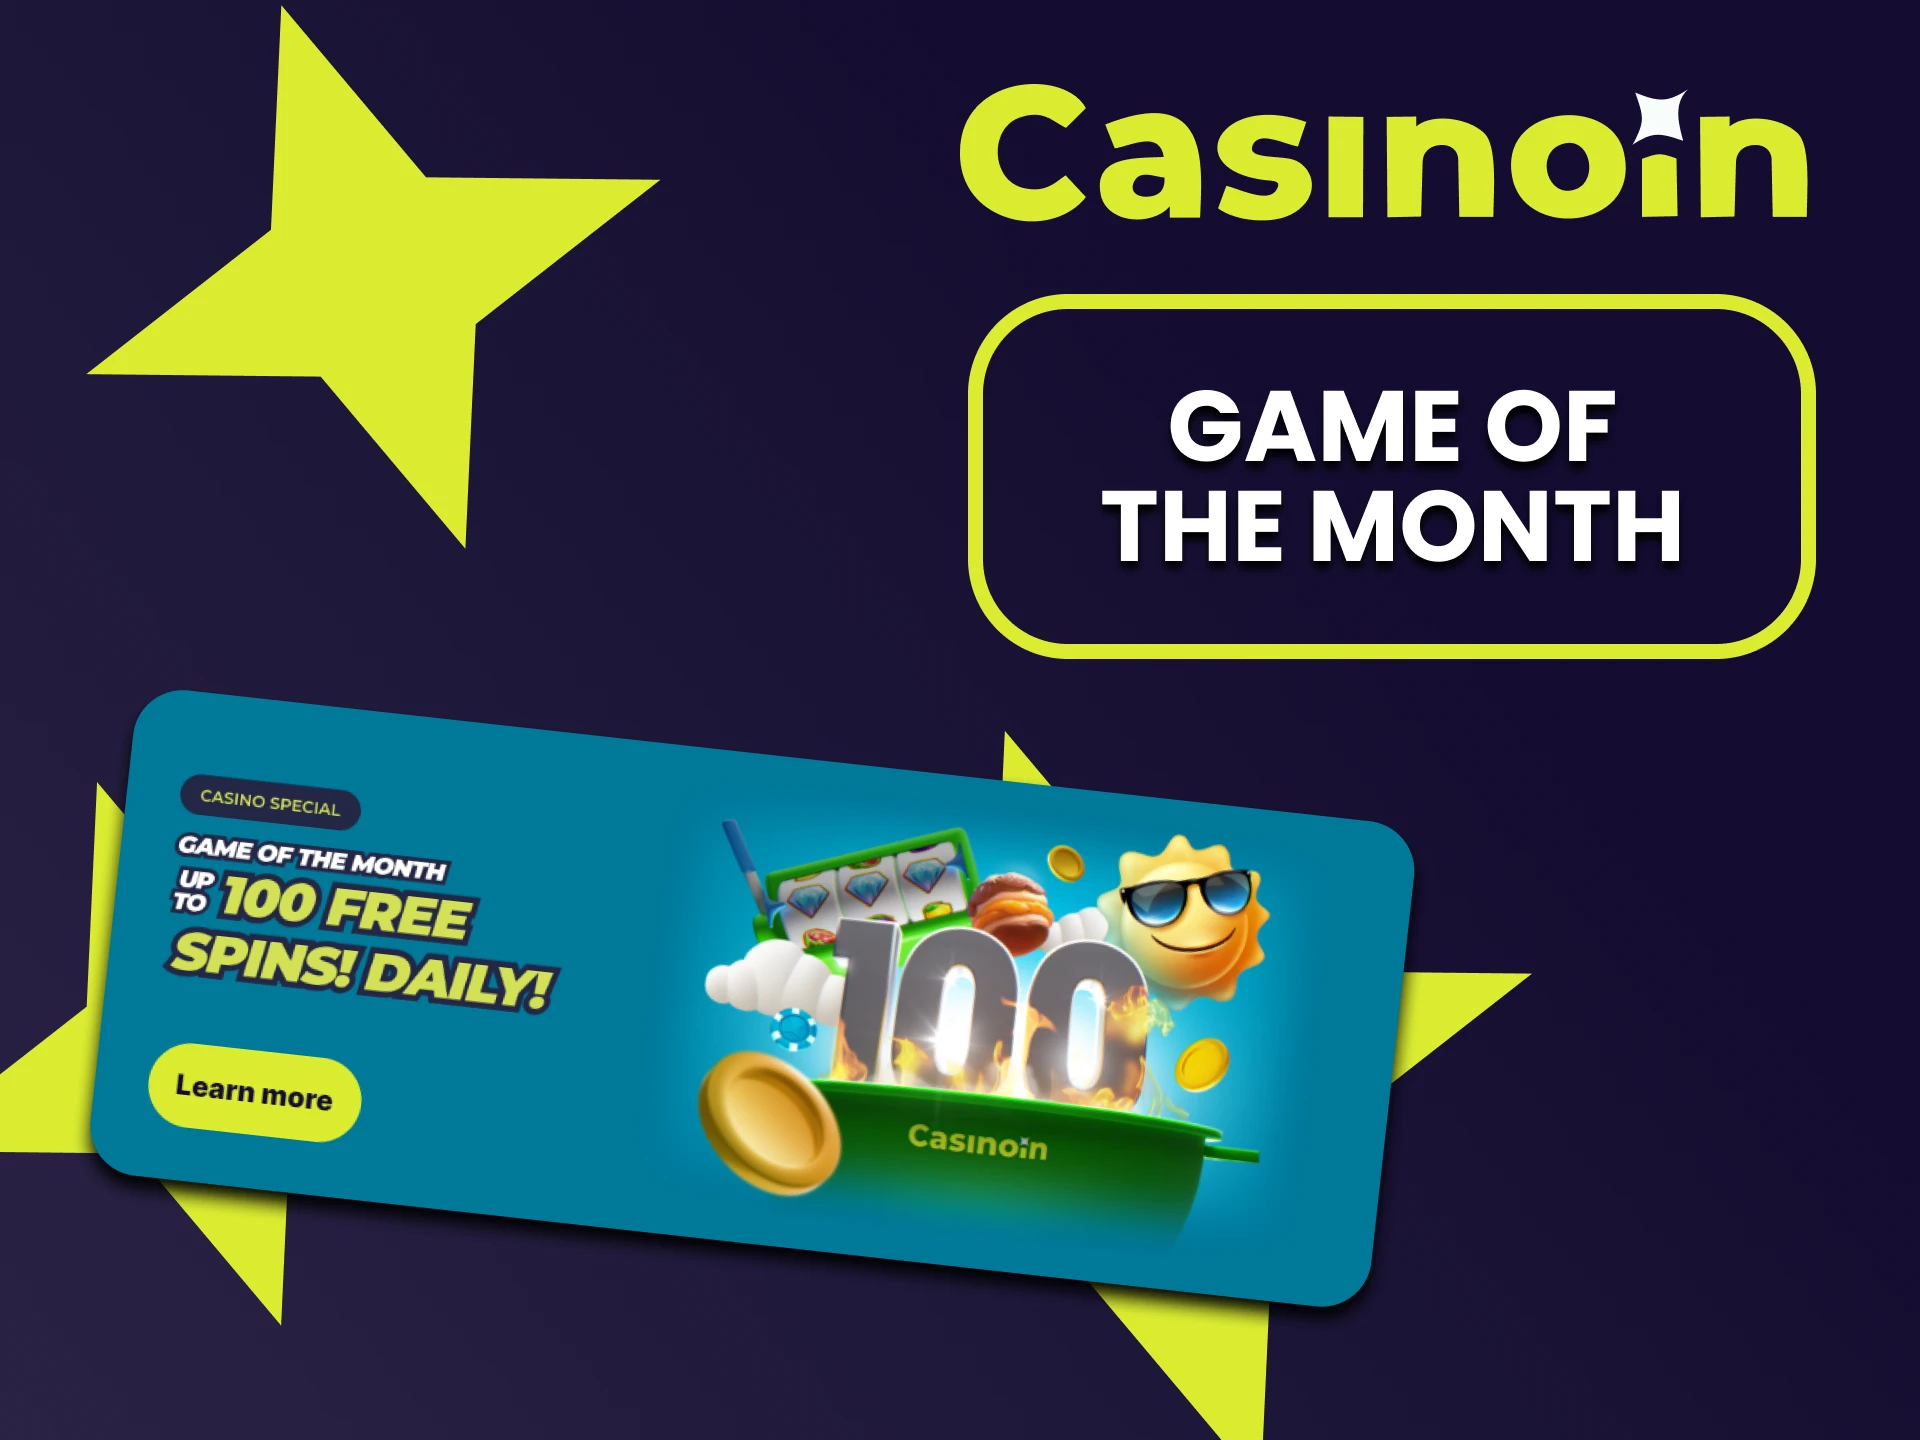 Casinoin gives a special bonus for games.